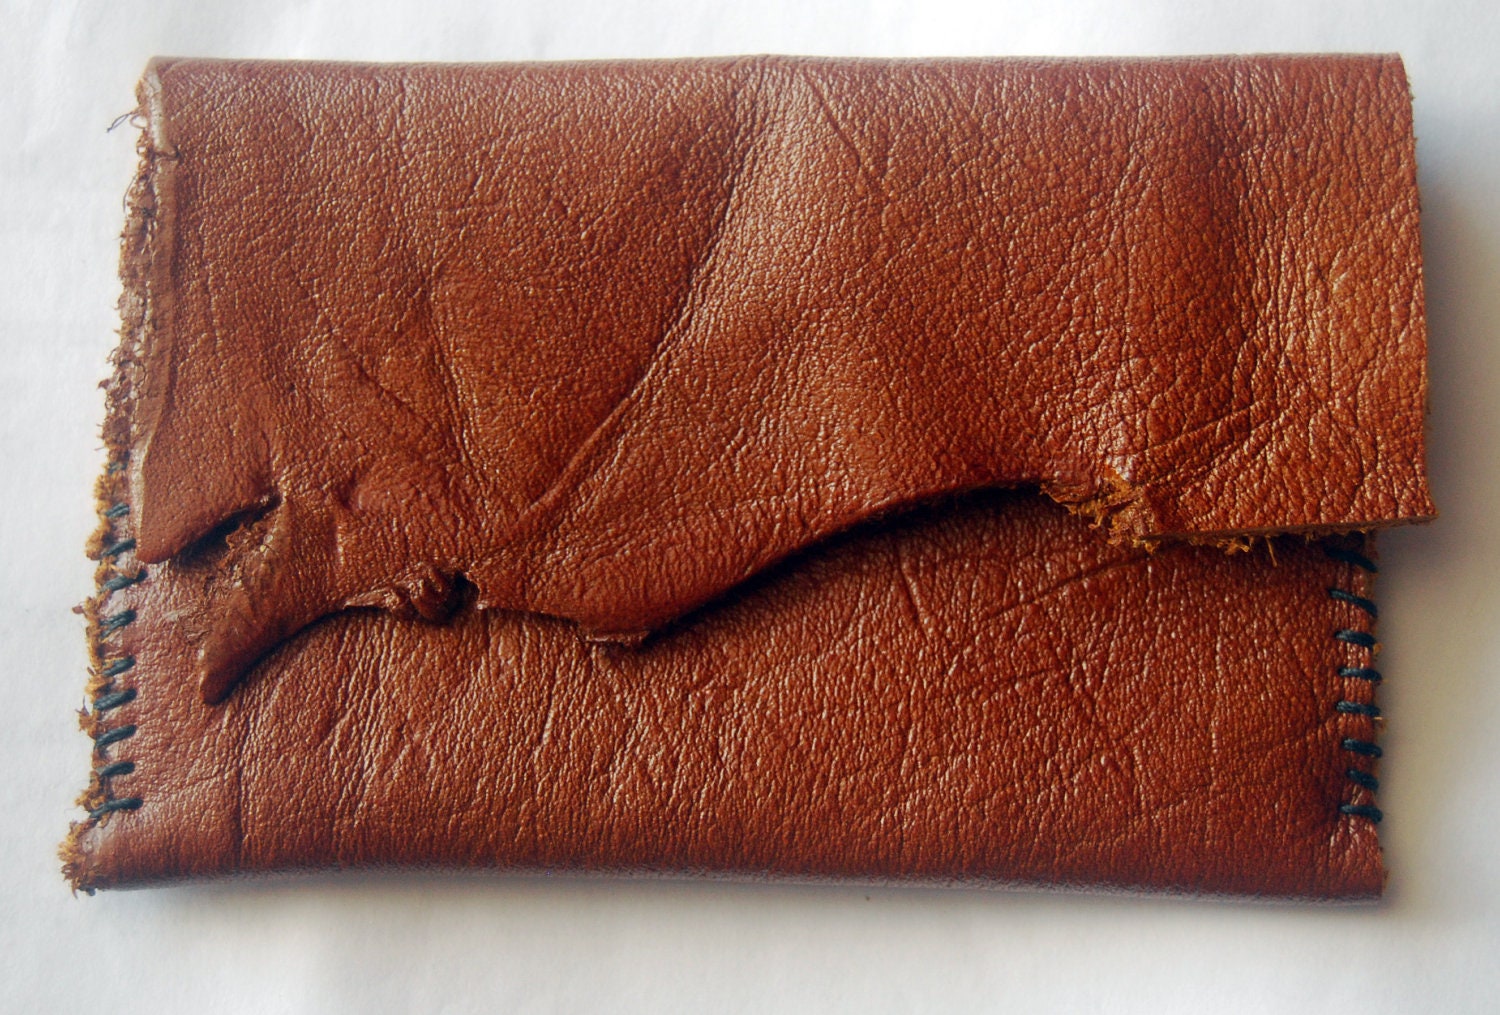 Hand-stitched Leather Credit / Business Card Pouch - Rustic Chestnut